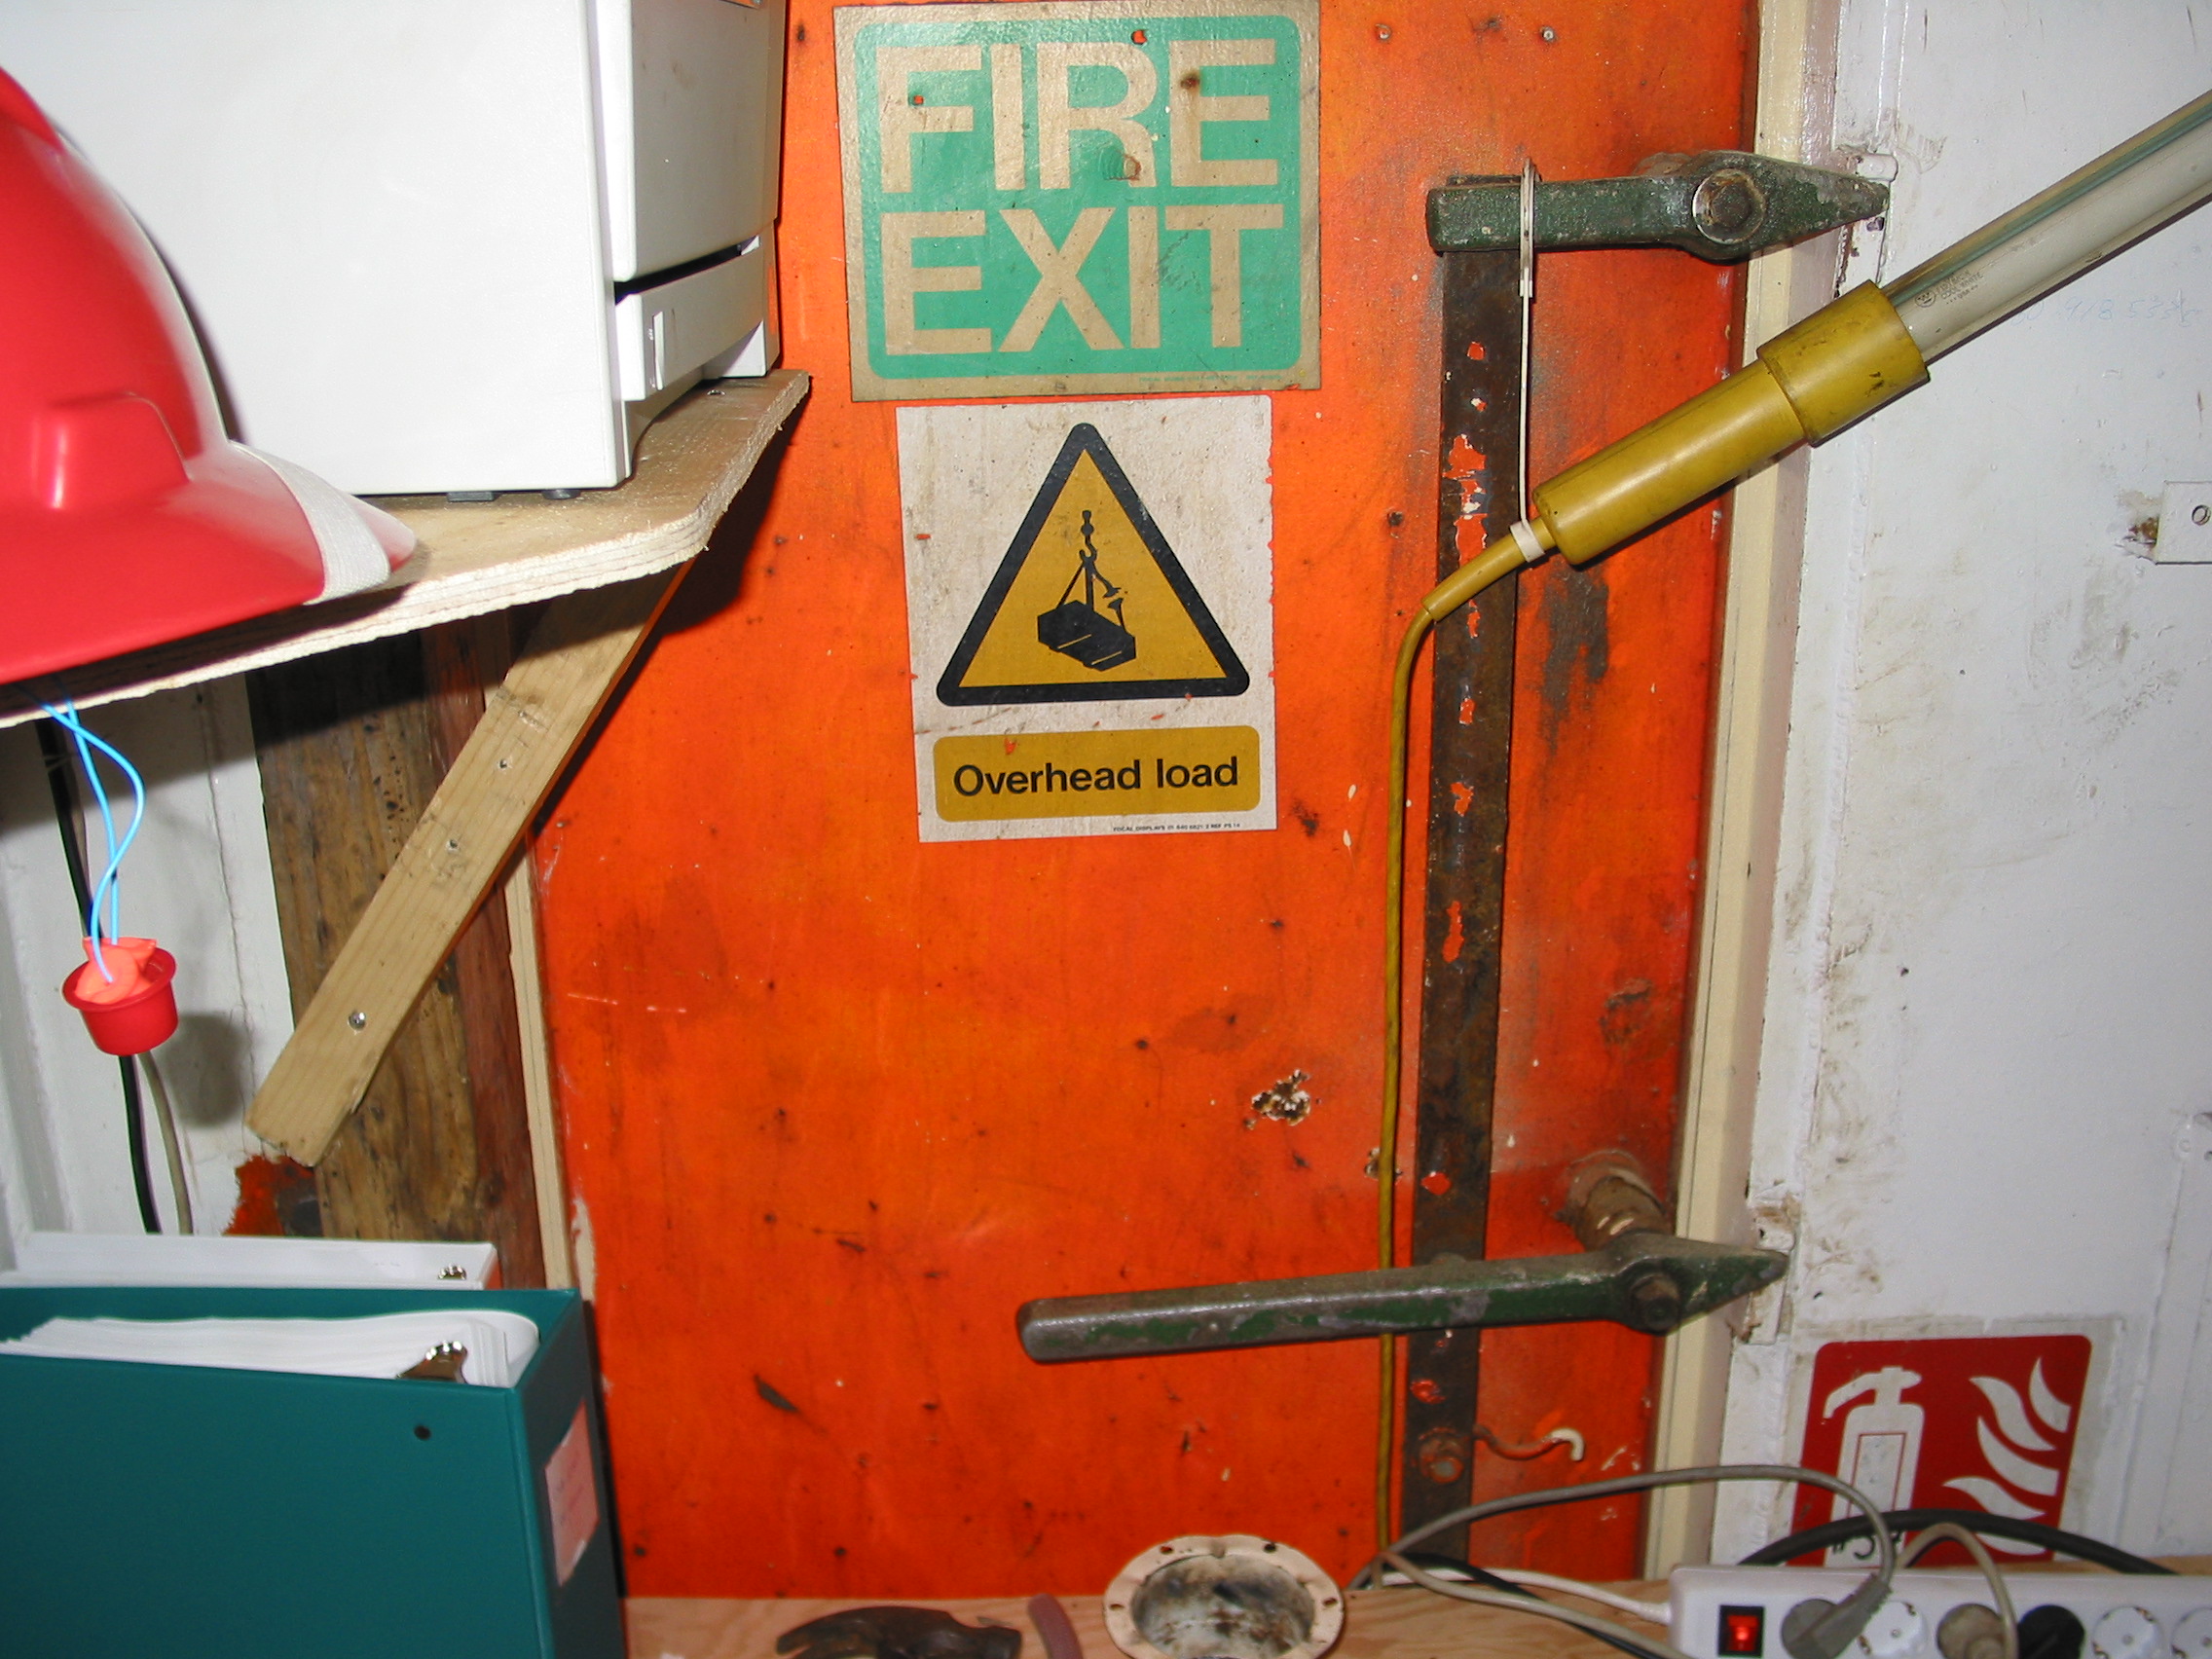 Safety First Photo Gallery    Examples Of Unsafe Acts   Conditions